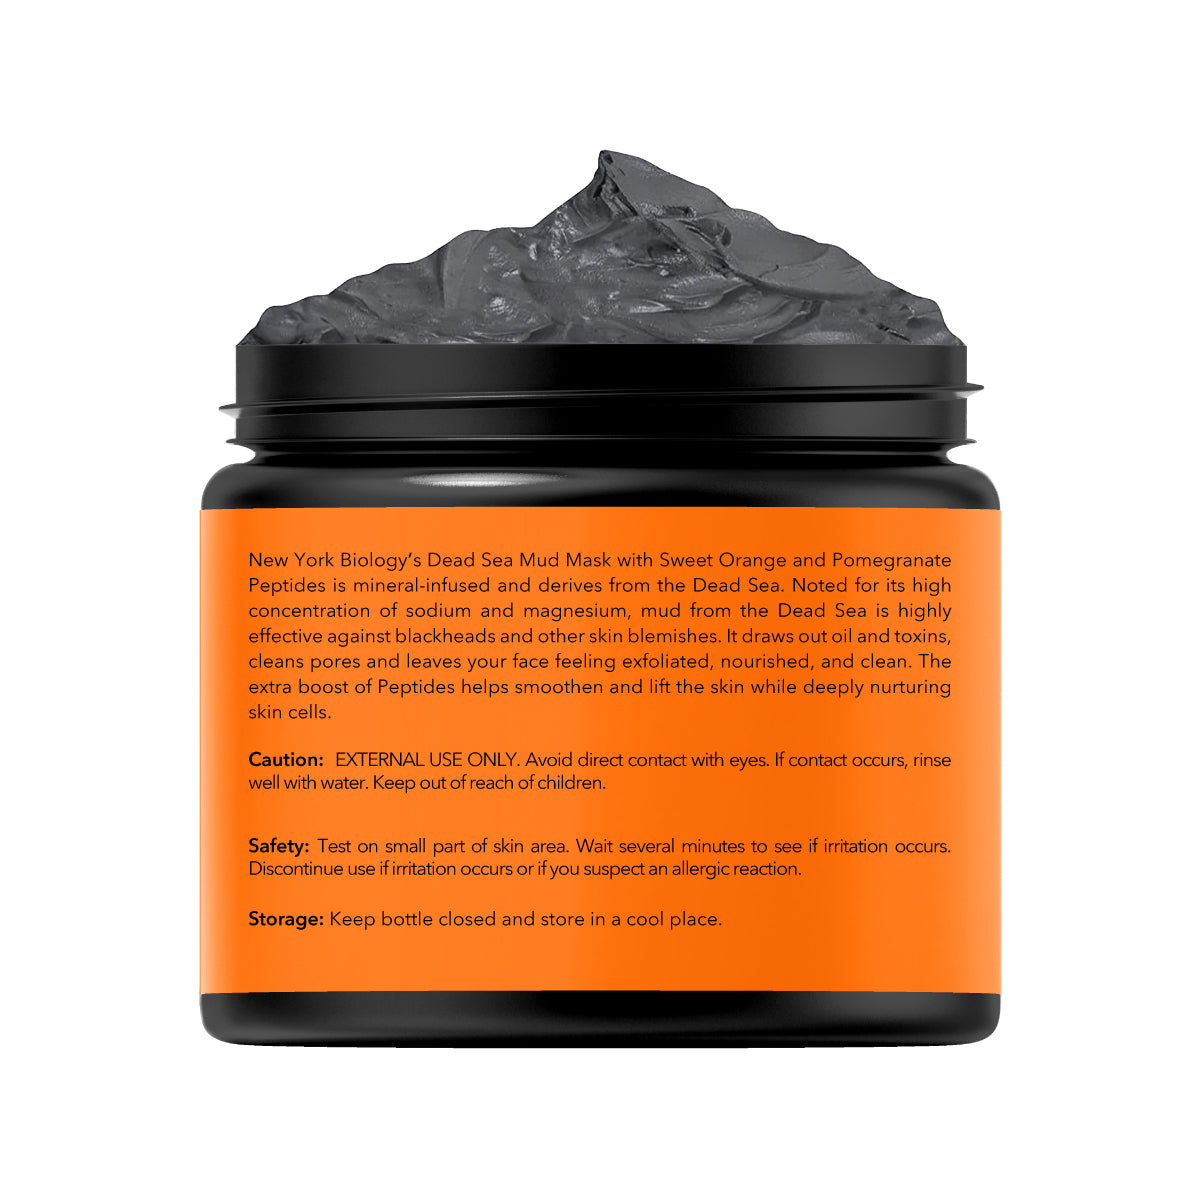 Dead Sea Mud Mask infused with Peptides - 4 oz